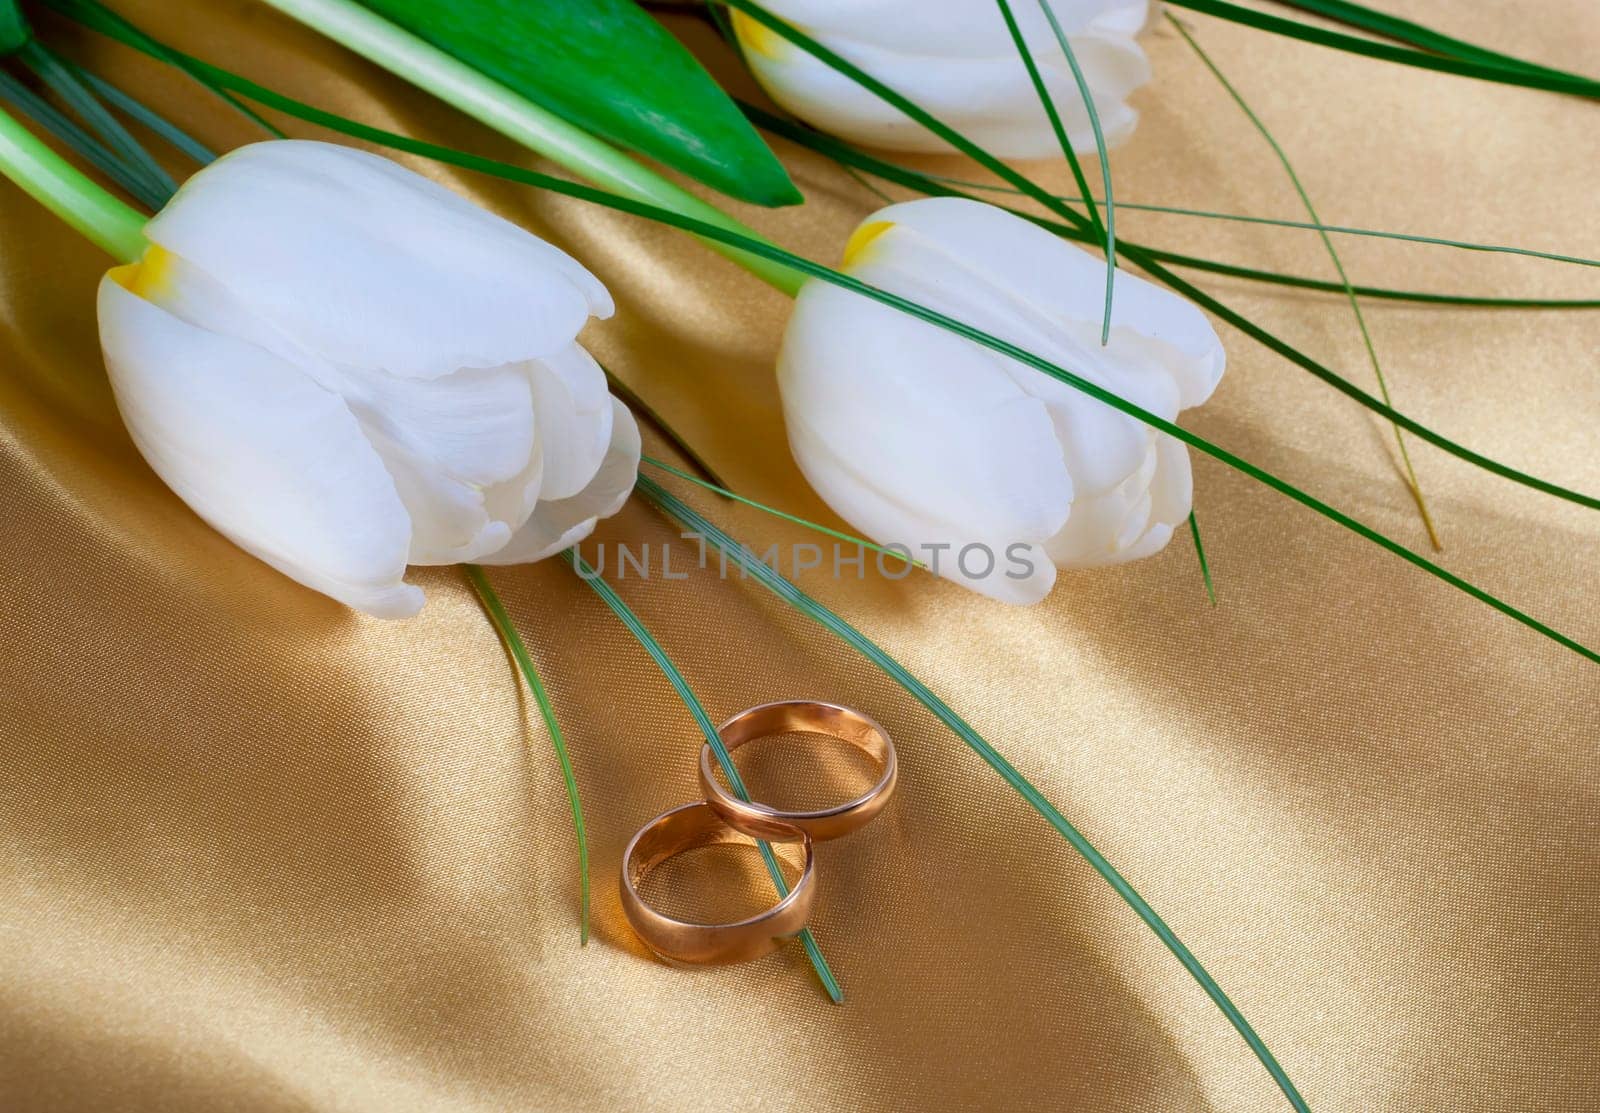 the bright white tulips and wedding rings